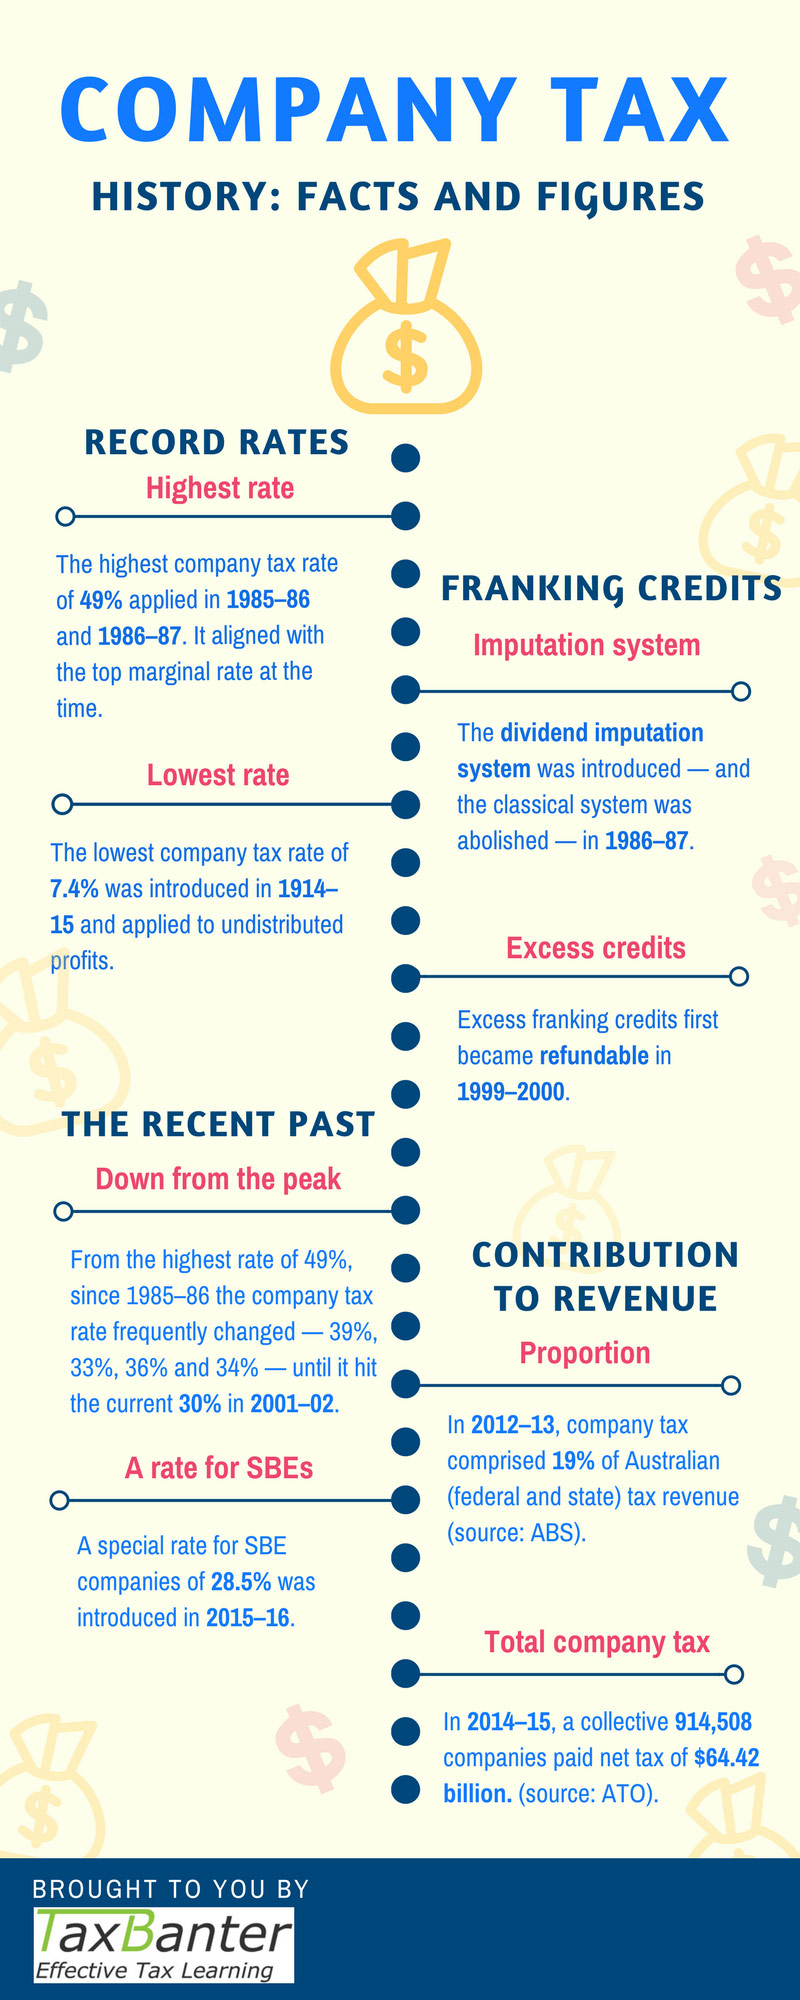 Company Tax Infographic by TaxBanter